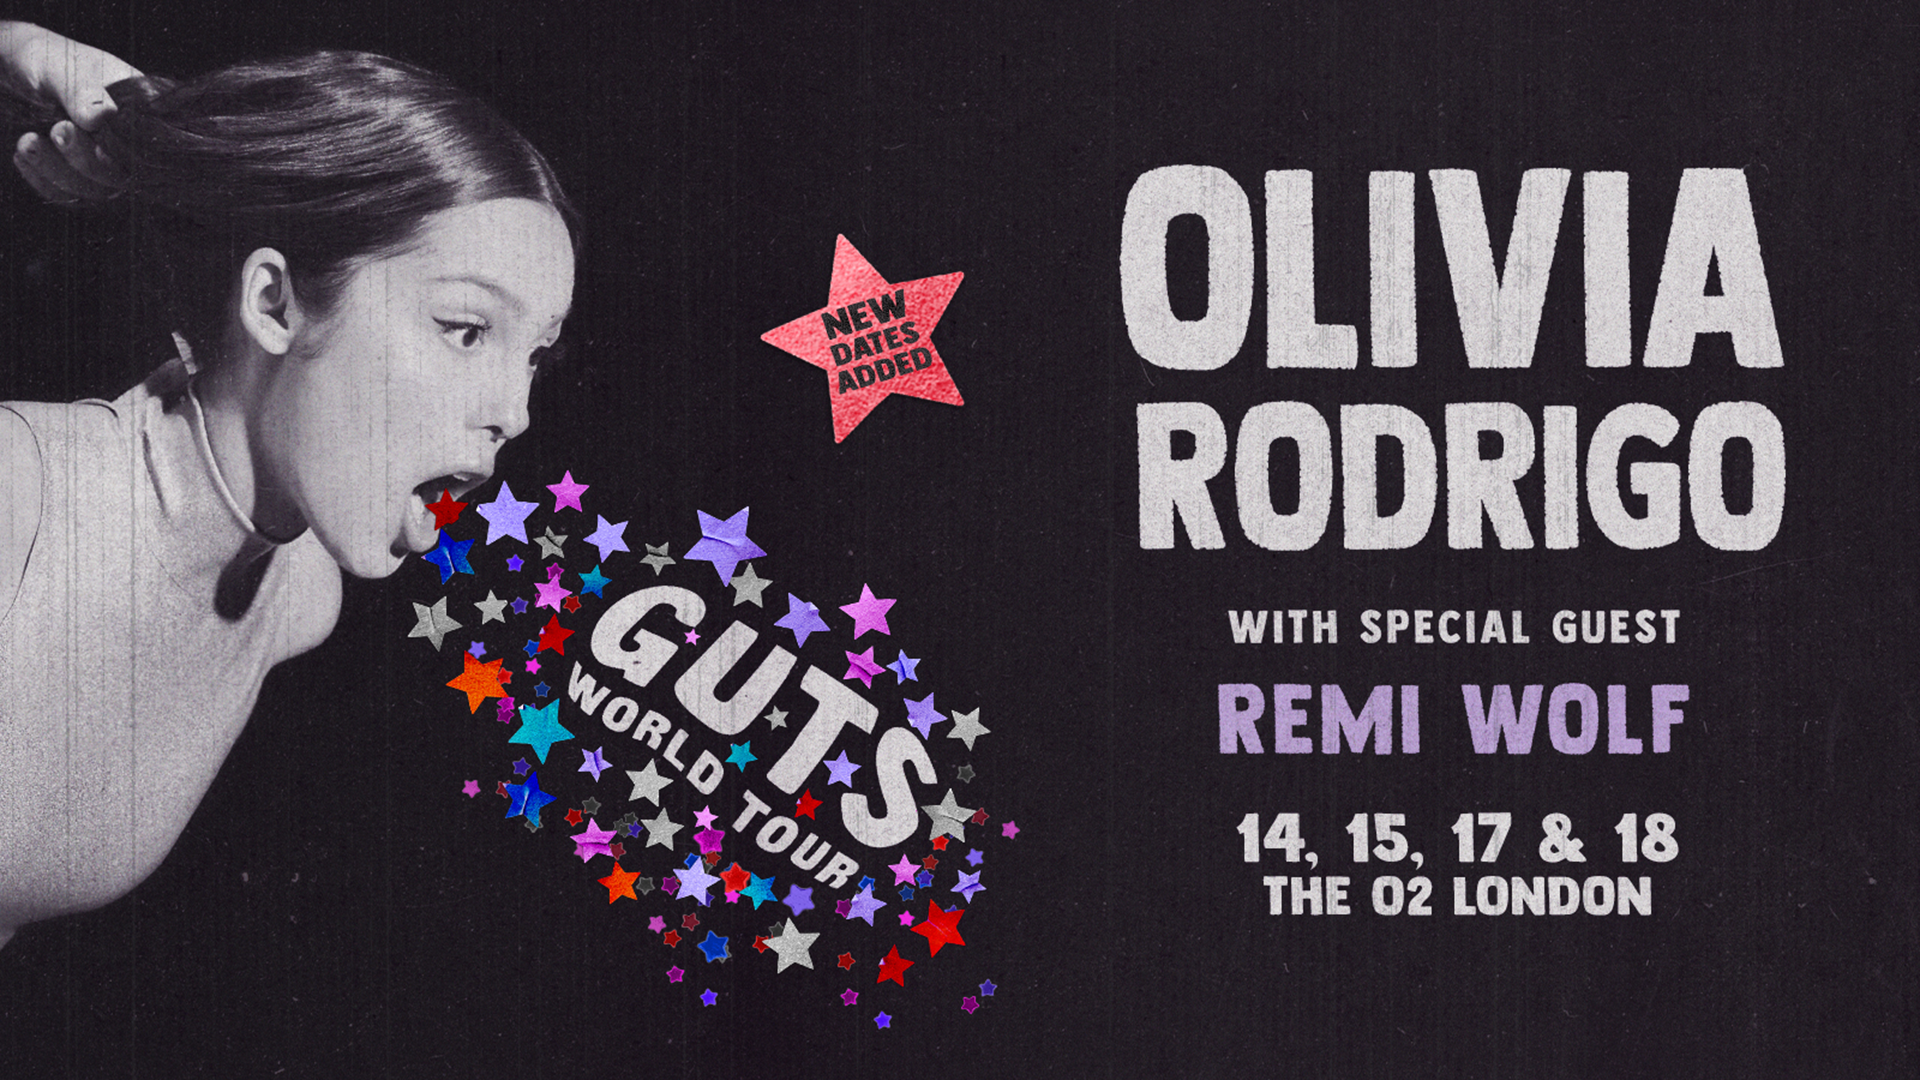 Event poster for Olivia Rodrigo's concert featuring special guest Remi Wolf at The O2 on 14, 15, 17, and 18, with a visually striking design of stars and bold text.